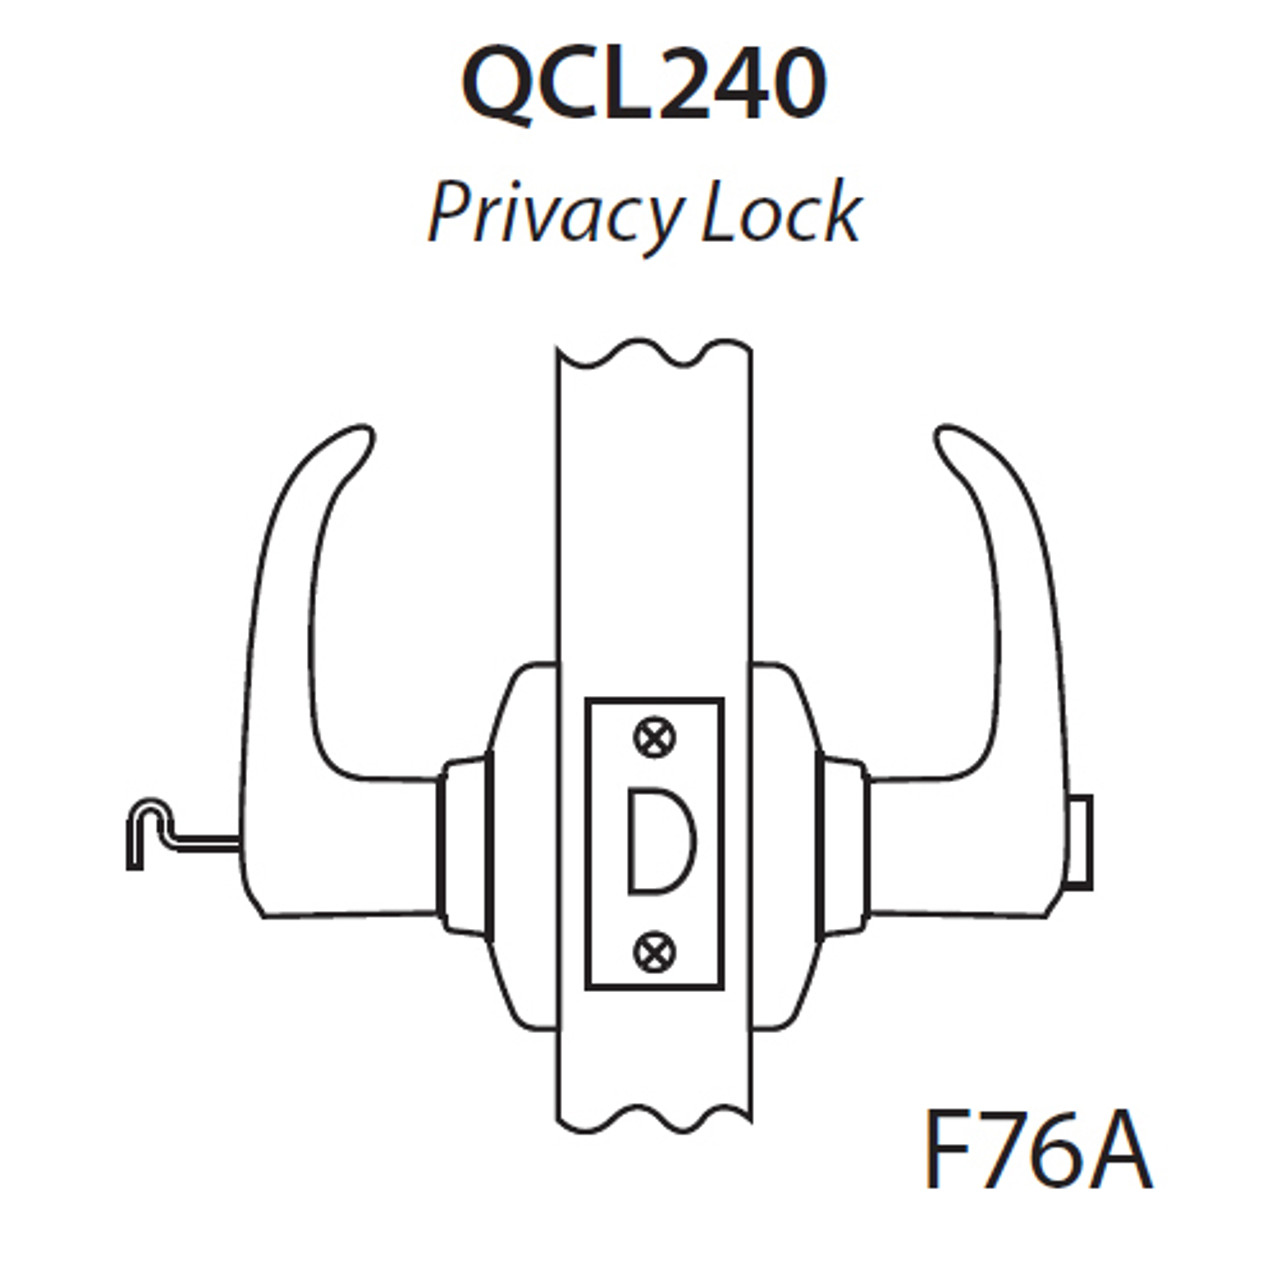 QCL240M613NR8NOS Stanley QCL200 Series Cylindrical Privacy Lock with Summit Lever in Oil Rubbed Bronze